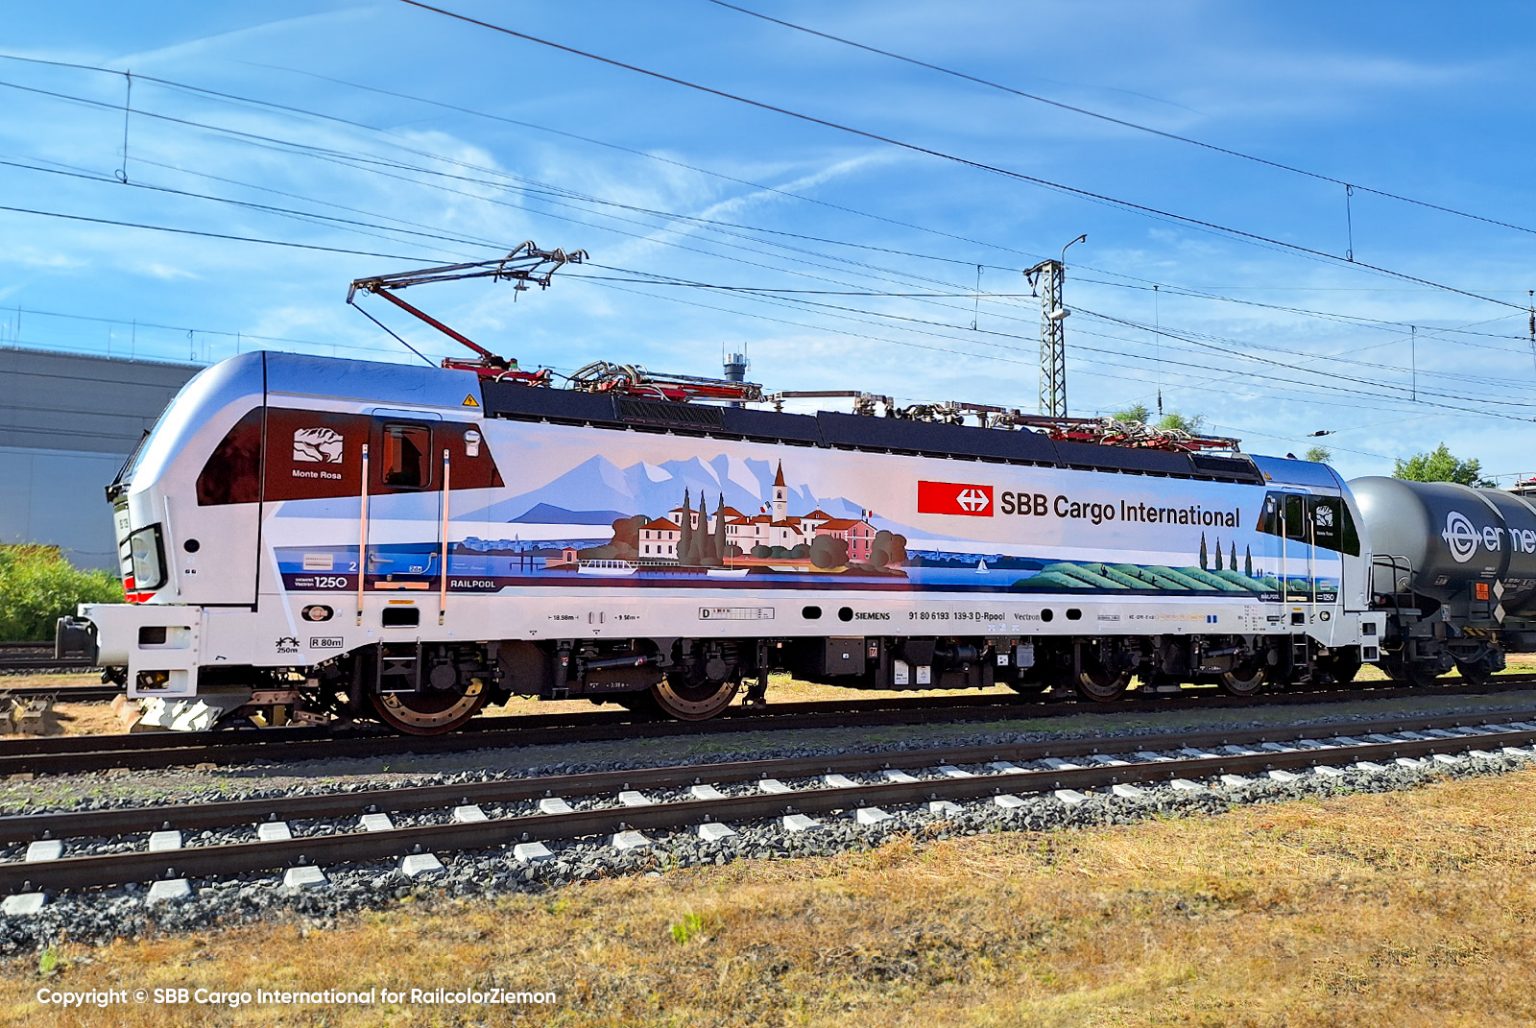 [Design] From the Alps to Milan: This is the ‘Monte Rosa’ for SBB Cargo ...